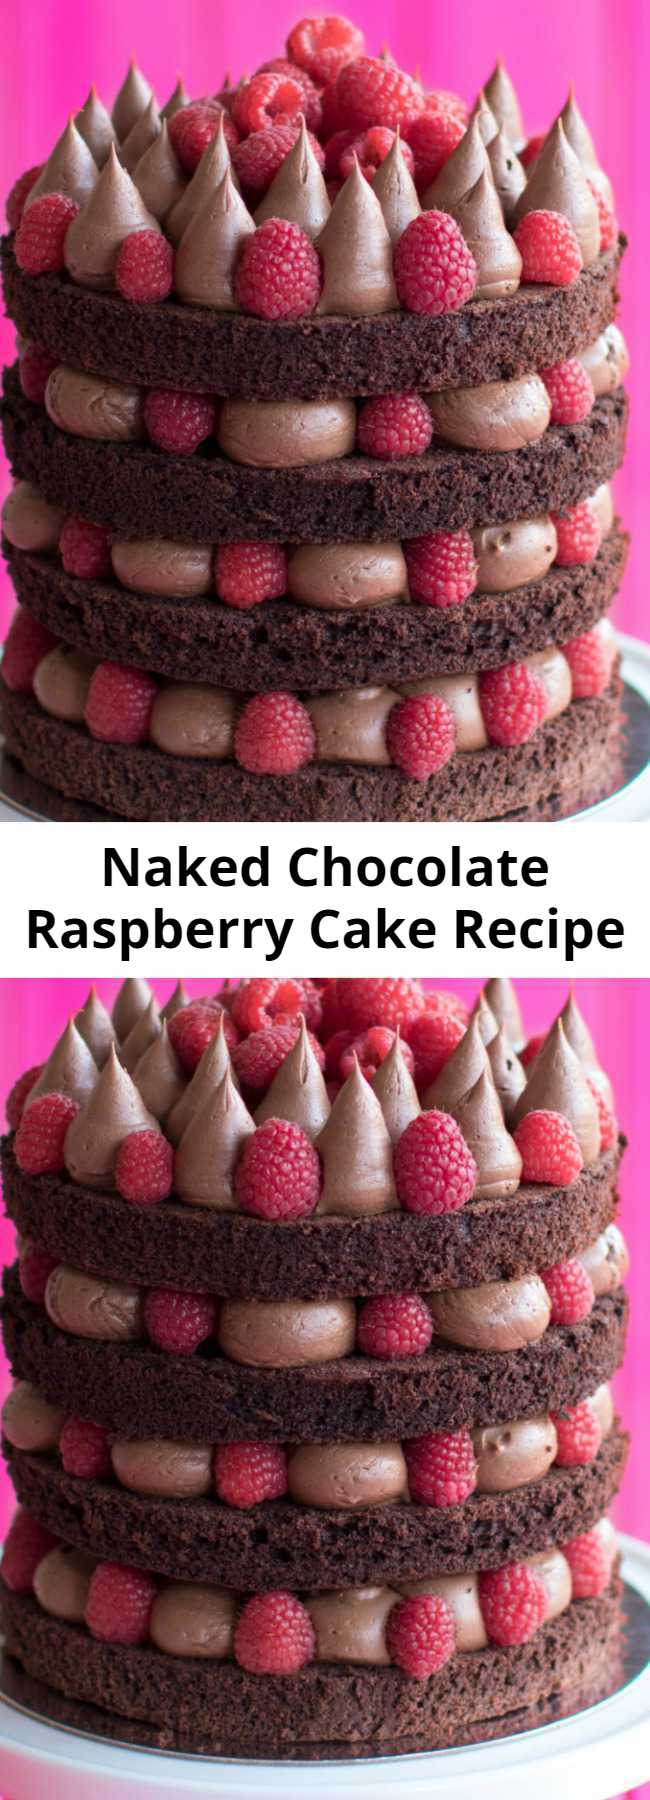 Naked Chocolate Raspberry Cake Recipe - Did somebody say chocolate & raspberries? * removes clothes *